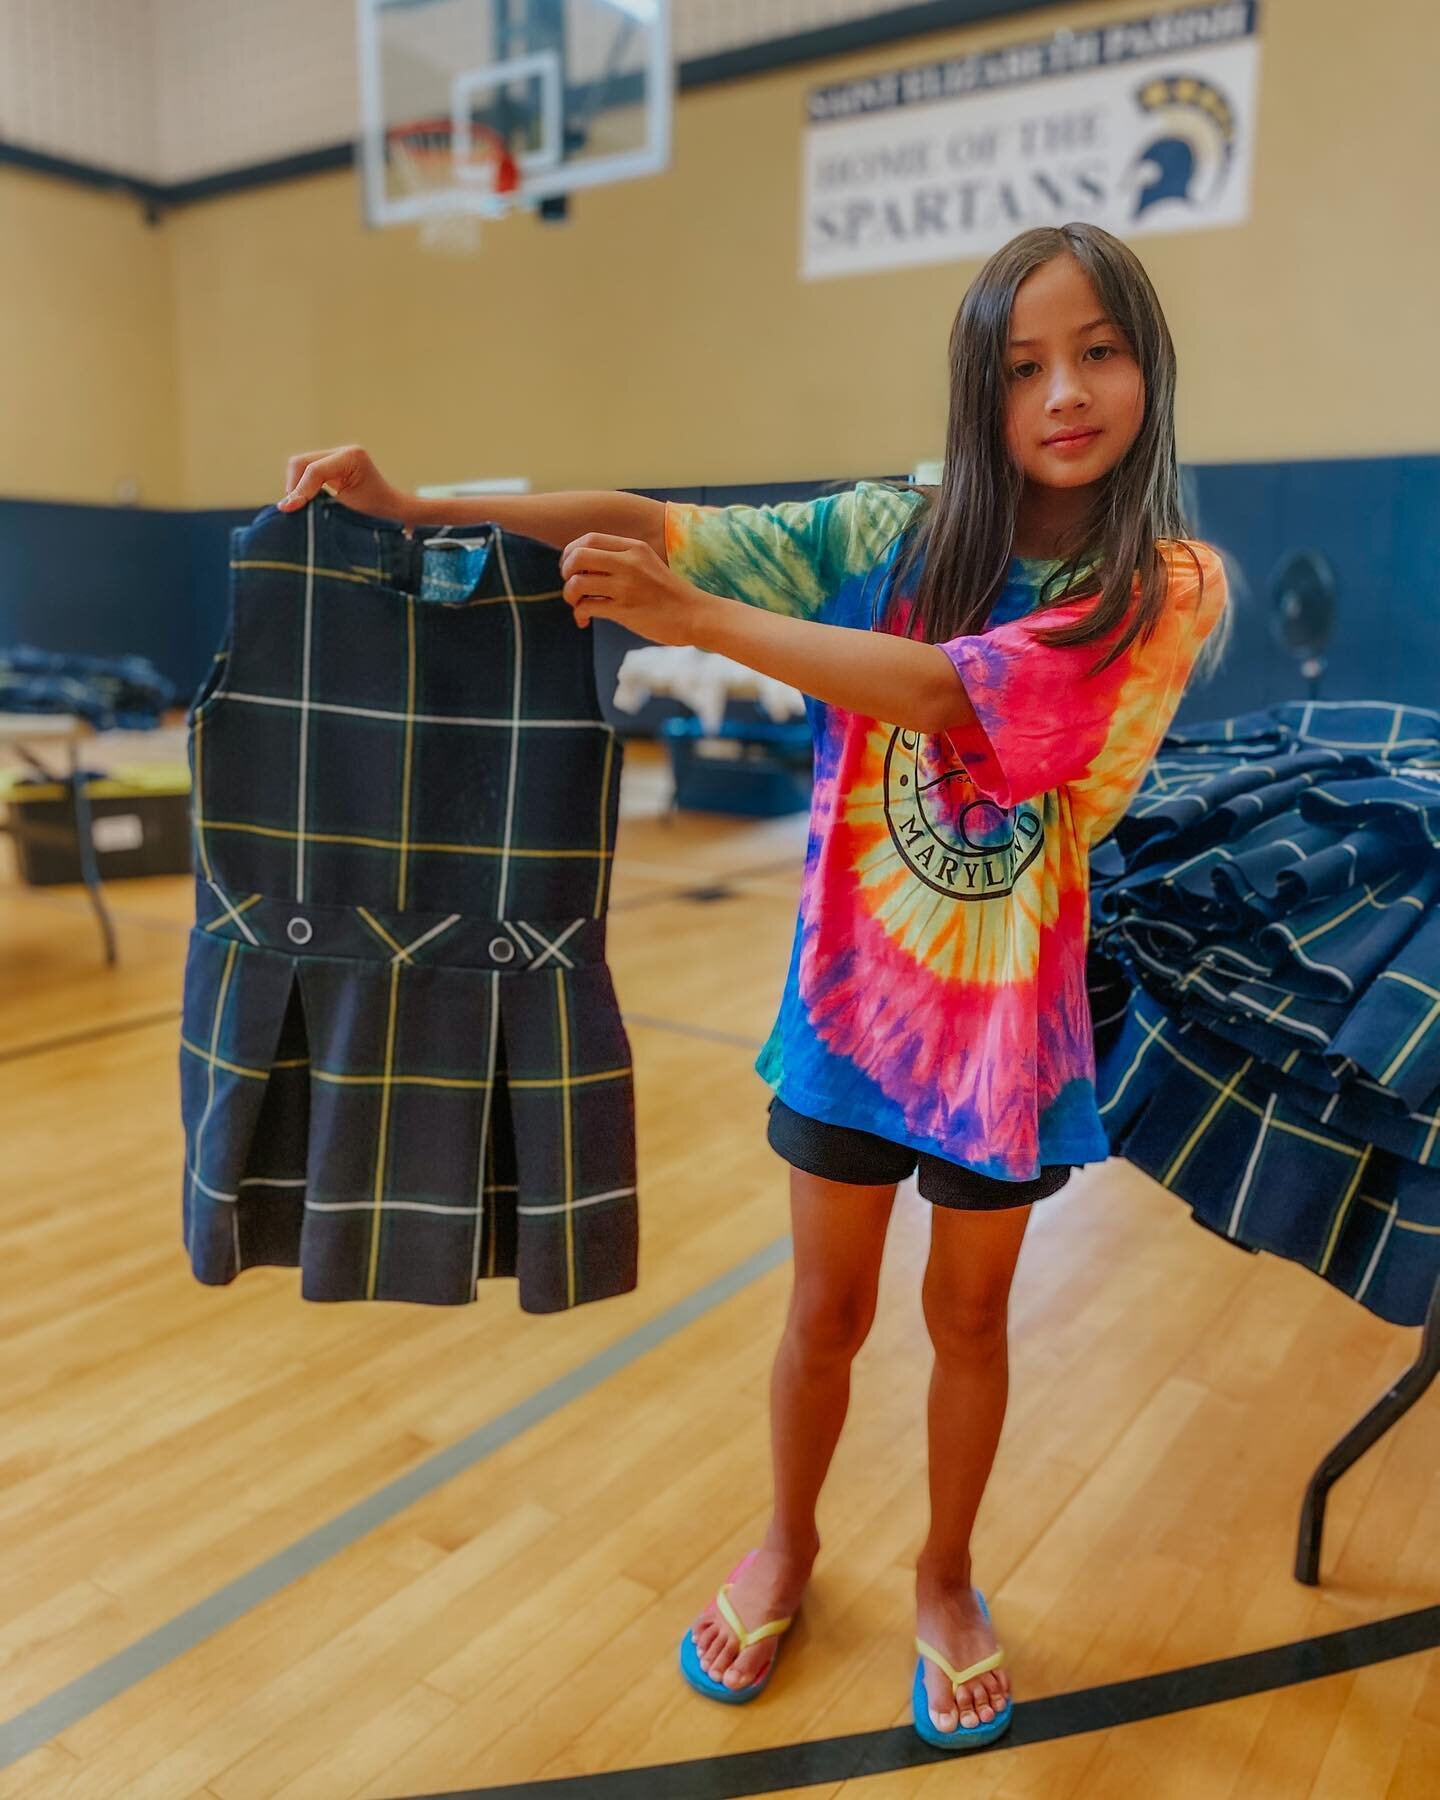 A reminder that today is the last day of our used uniform event. Stop by the gym to look through used uniform pieces, available at no cost, from 10am to 3pm.